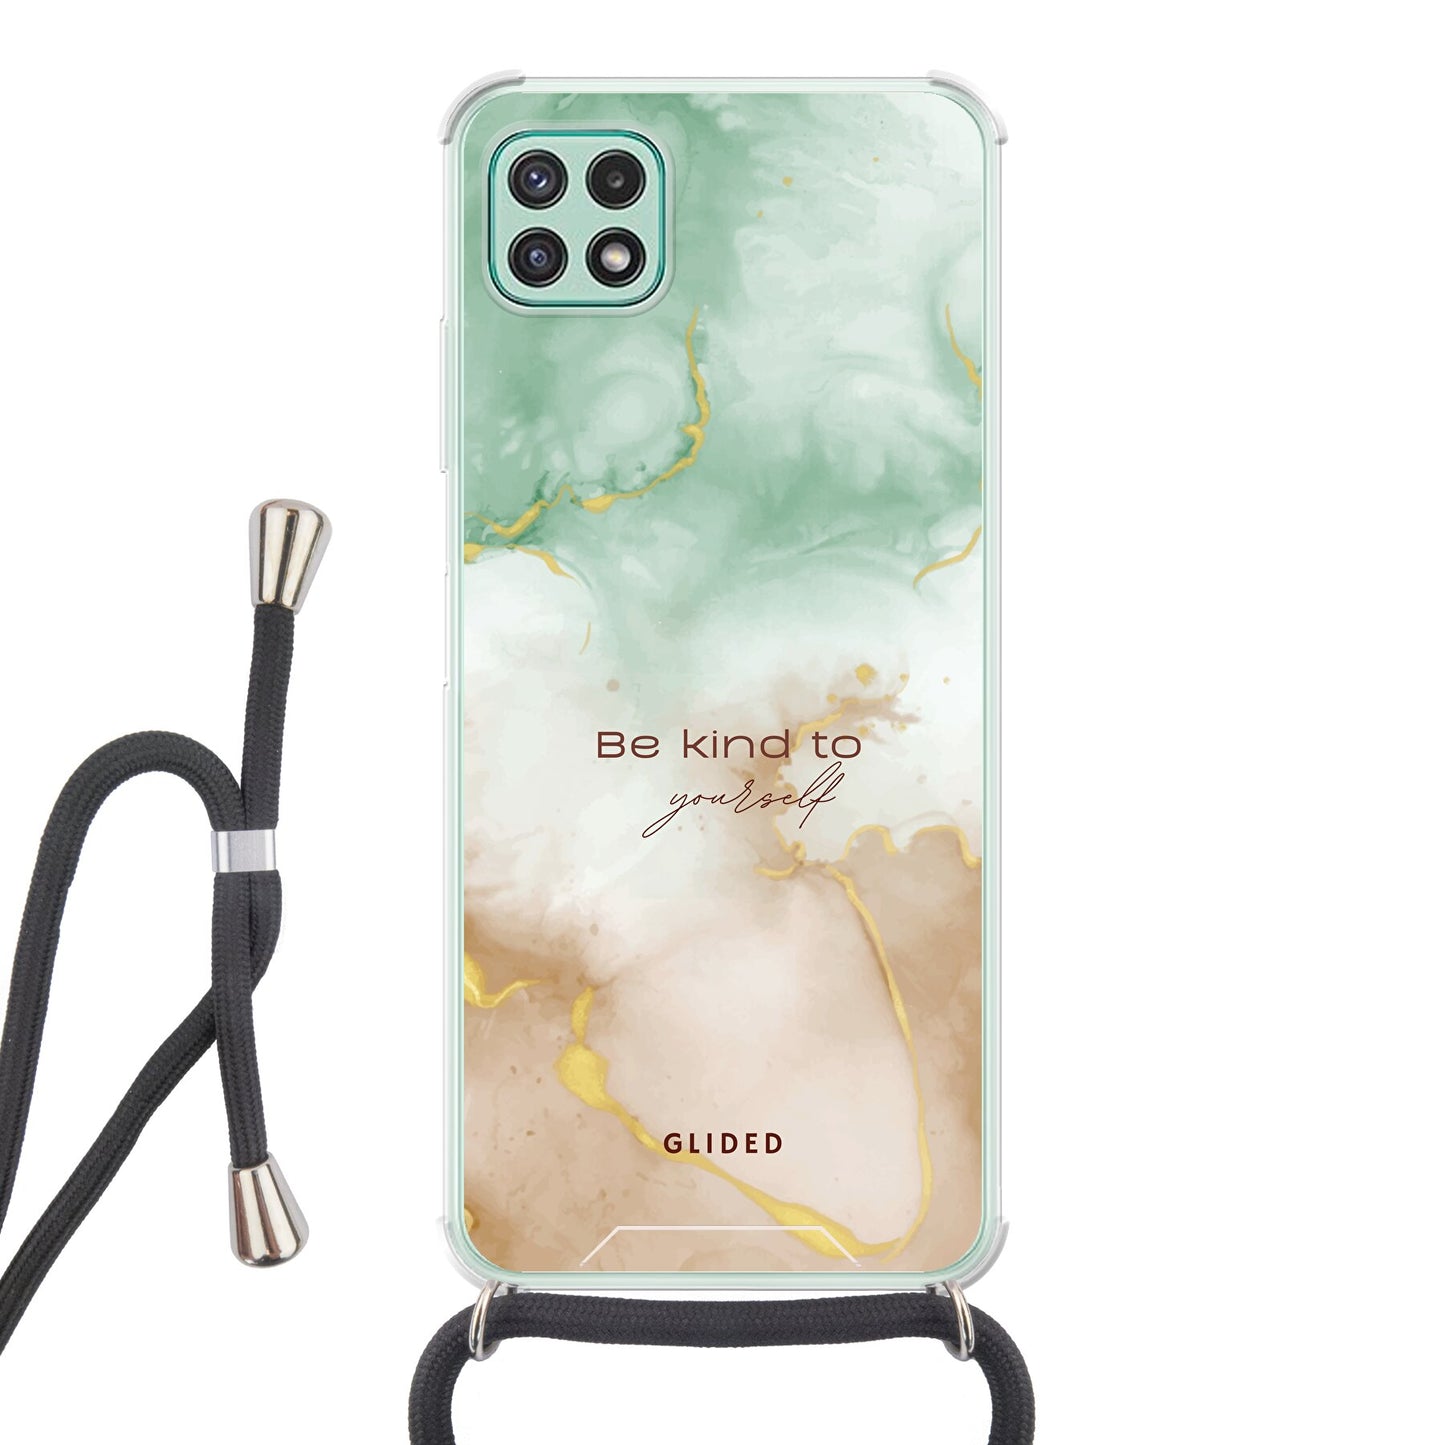 Kind to yourself - Samsung Galaxy A22 5G Handyhülle Crossbody case mit Band